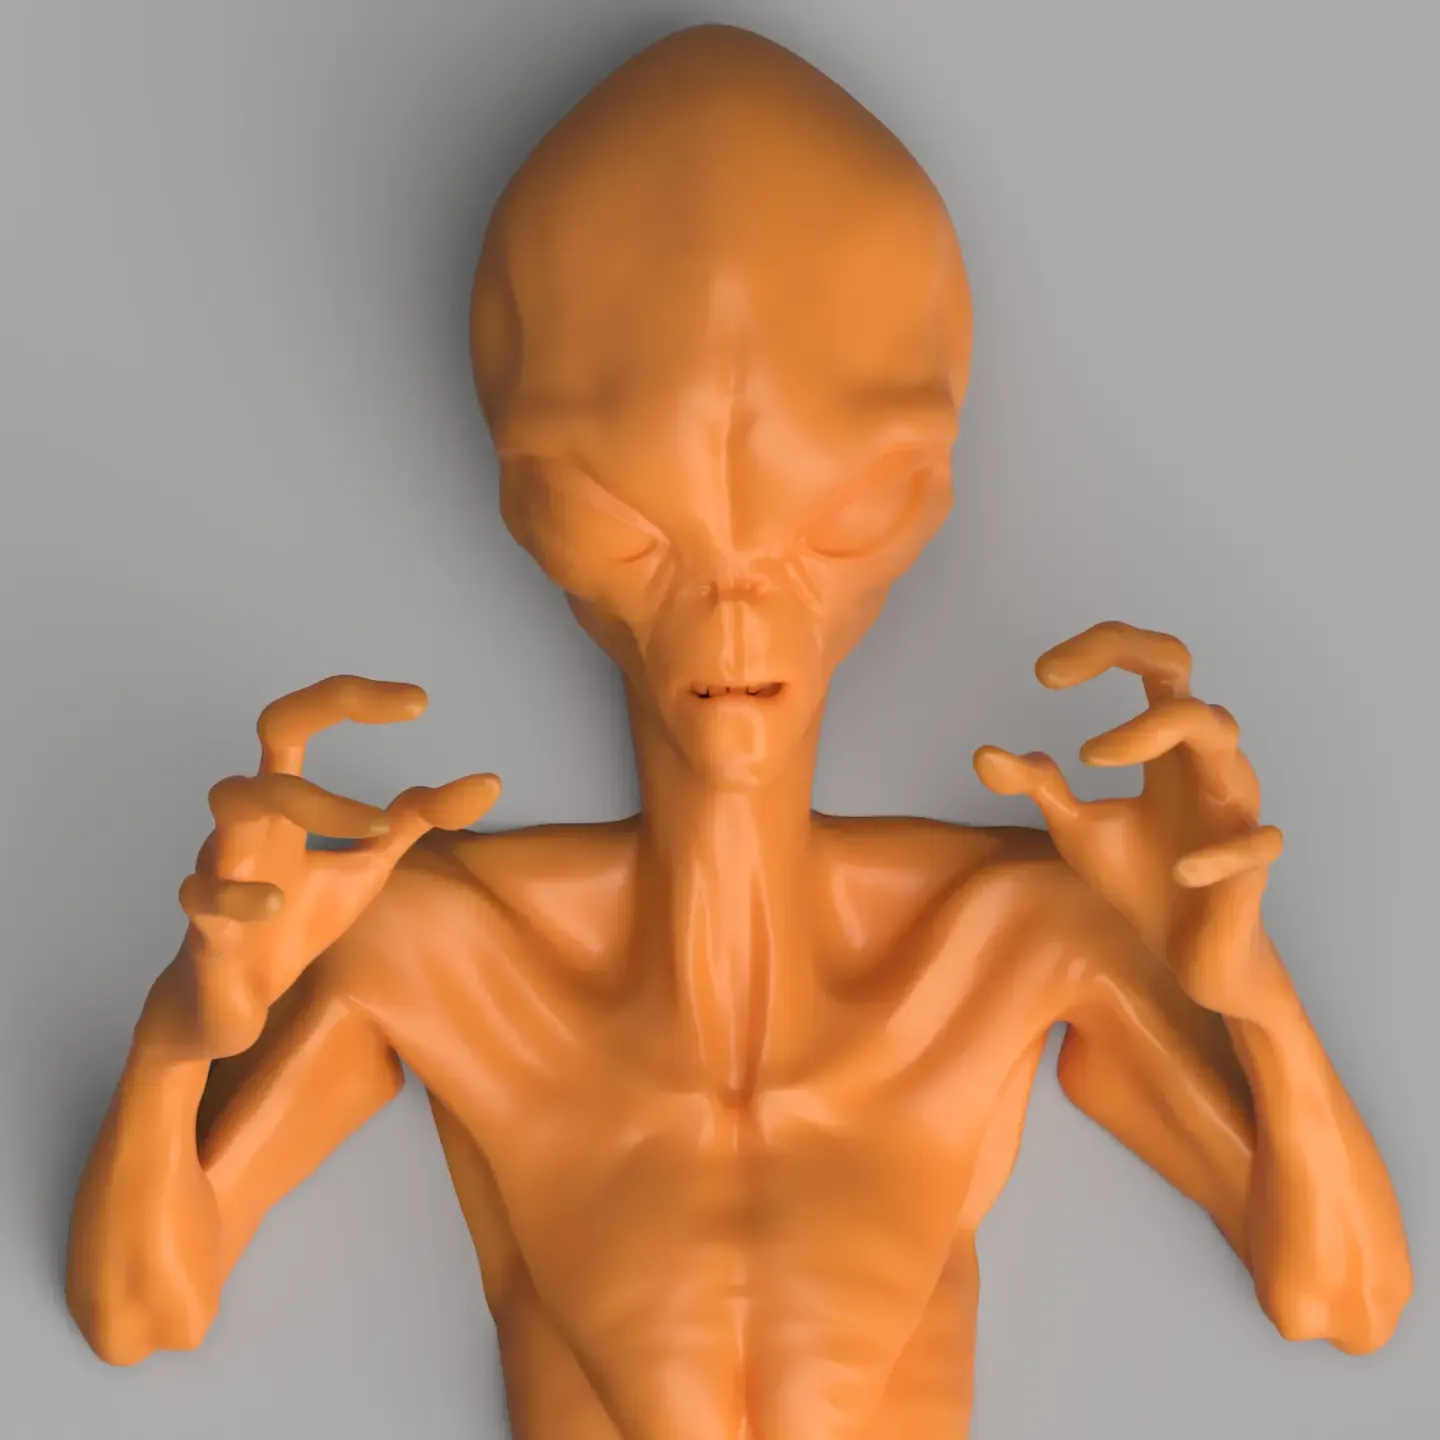 3D ALIEN WALL ART - PERFECT FOR HALLOWEEN! - *SUPPORT FREE*